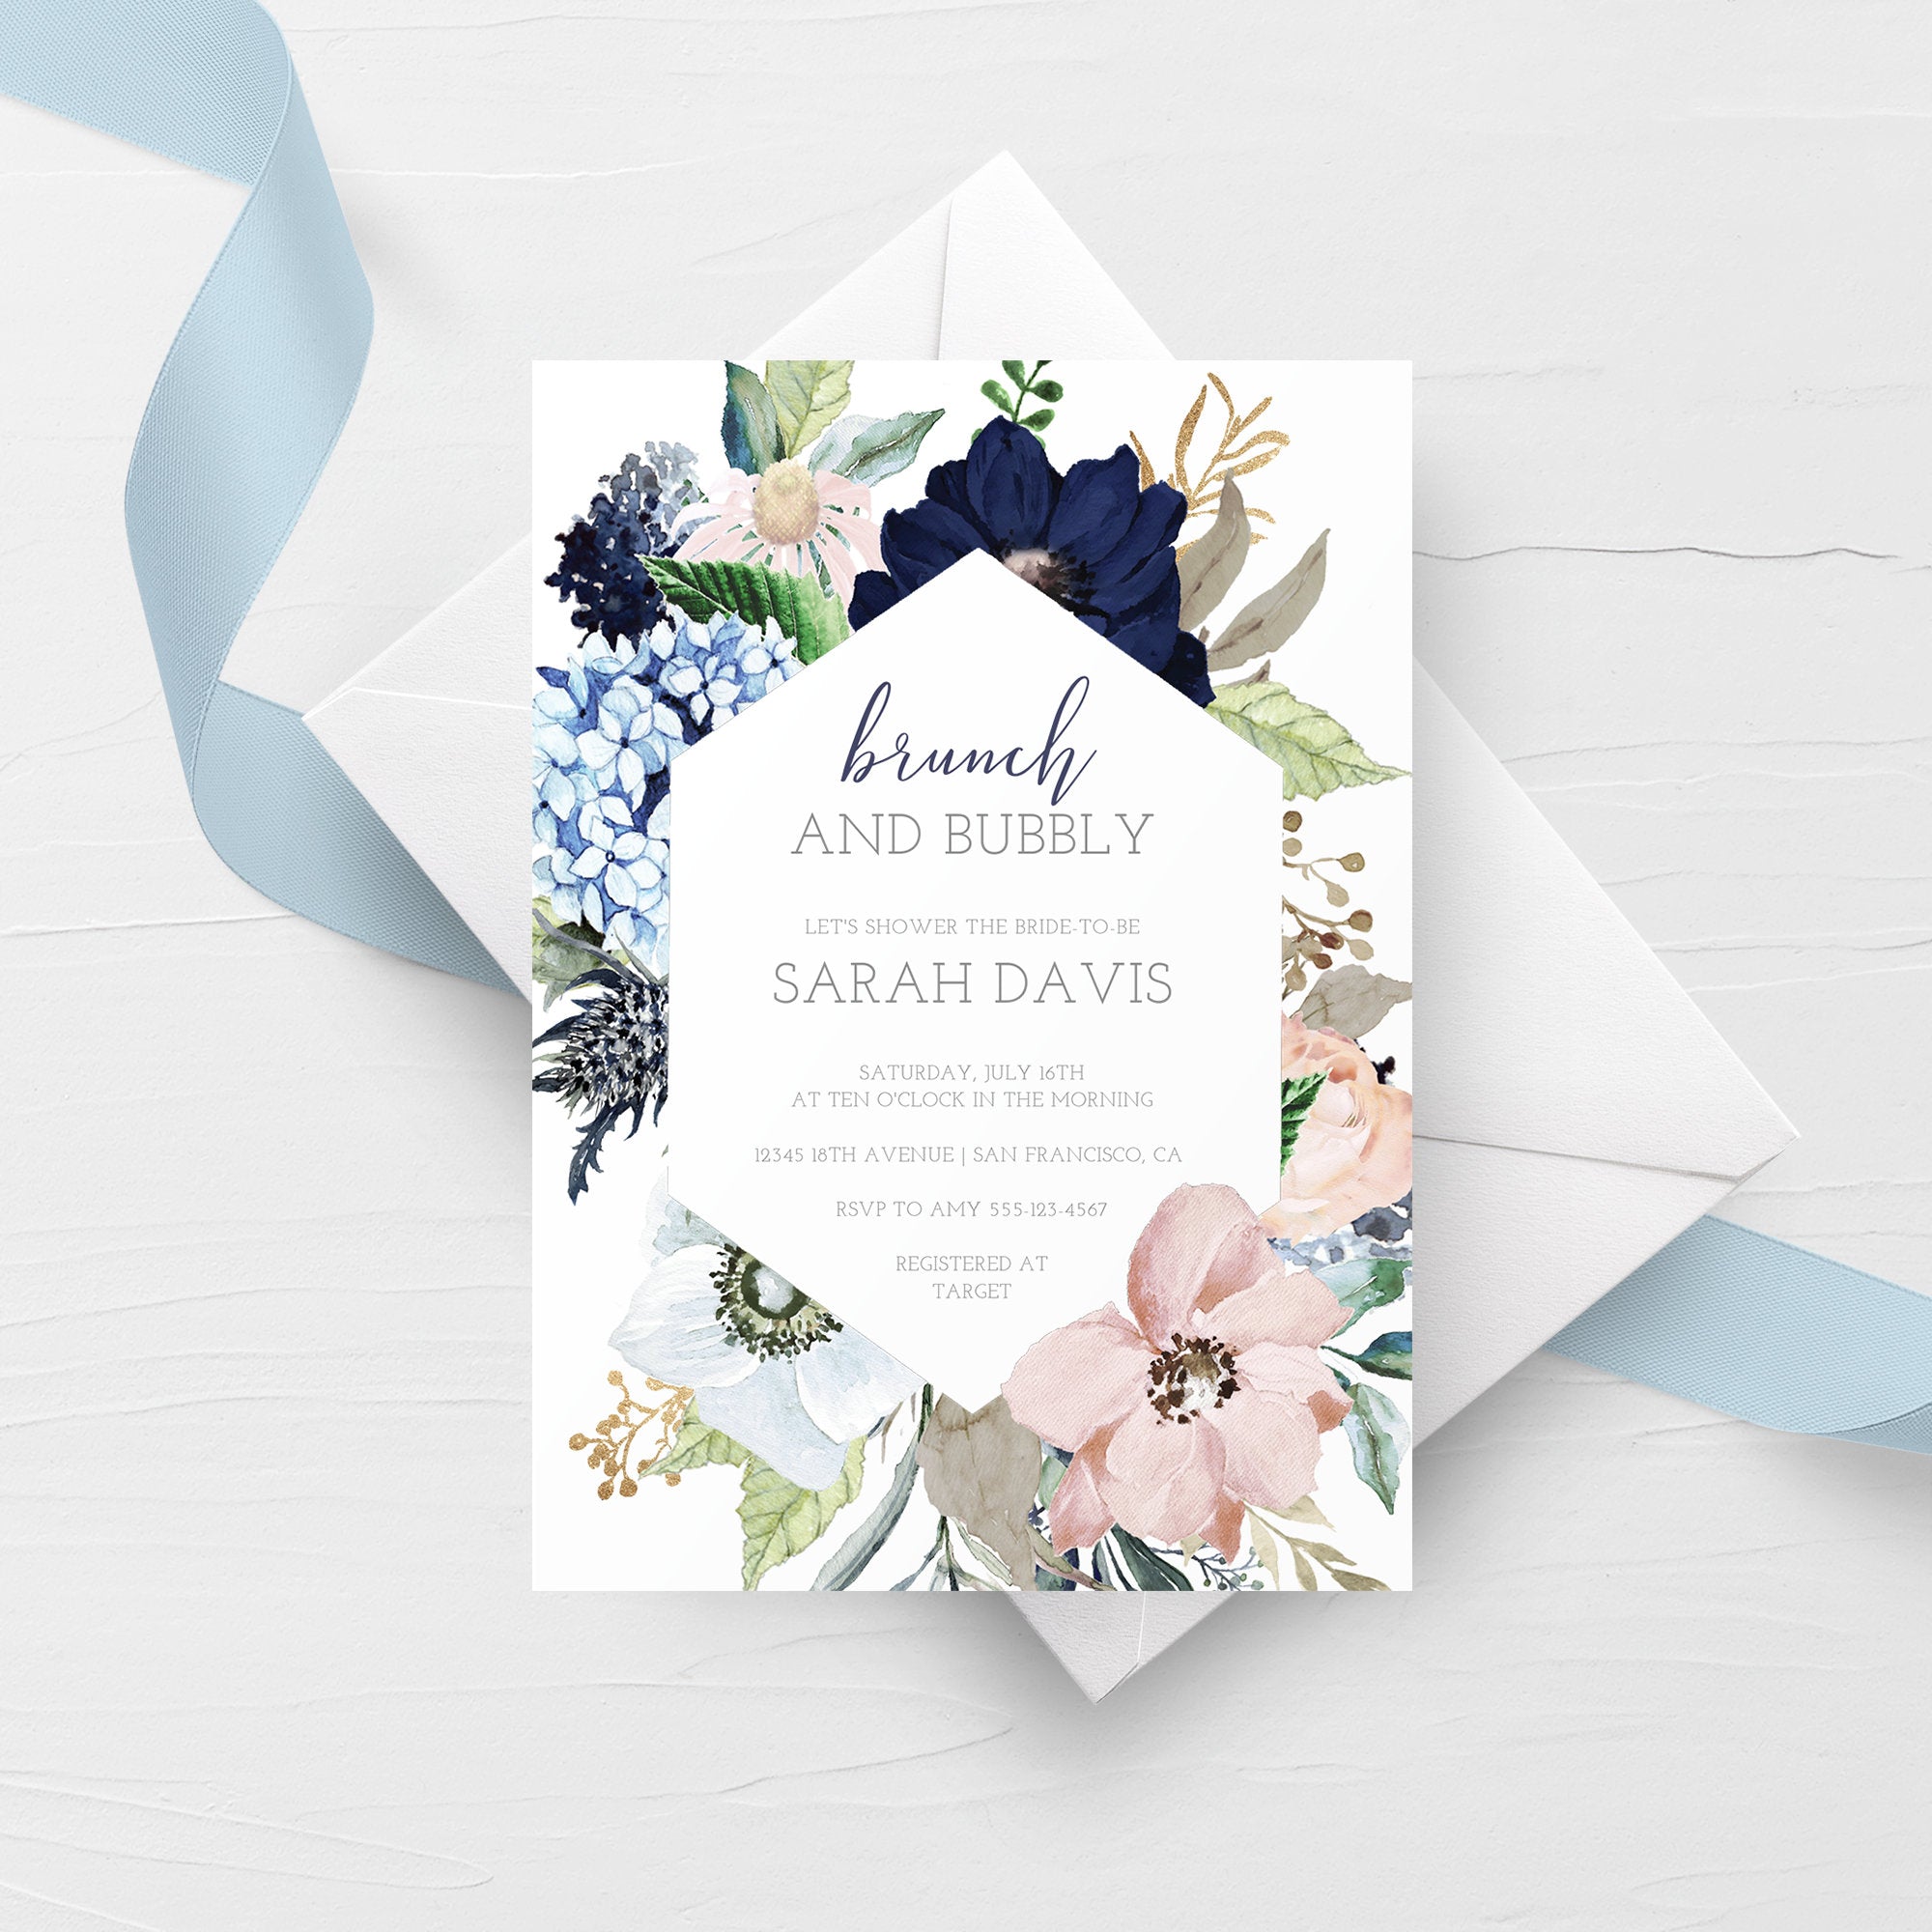 Brunch and Bubbly Bridal Shower Invitation Template, Navy and Blush Bridal Shower Invite, Brunch Bridal Shower Invite, 5x7 DIGITAL - MB100